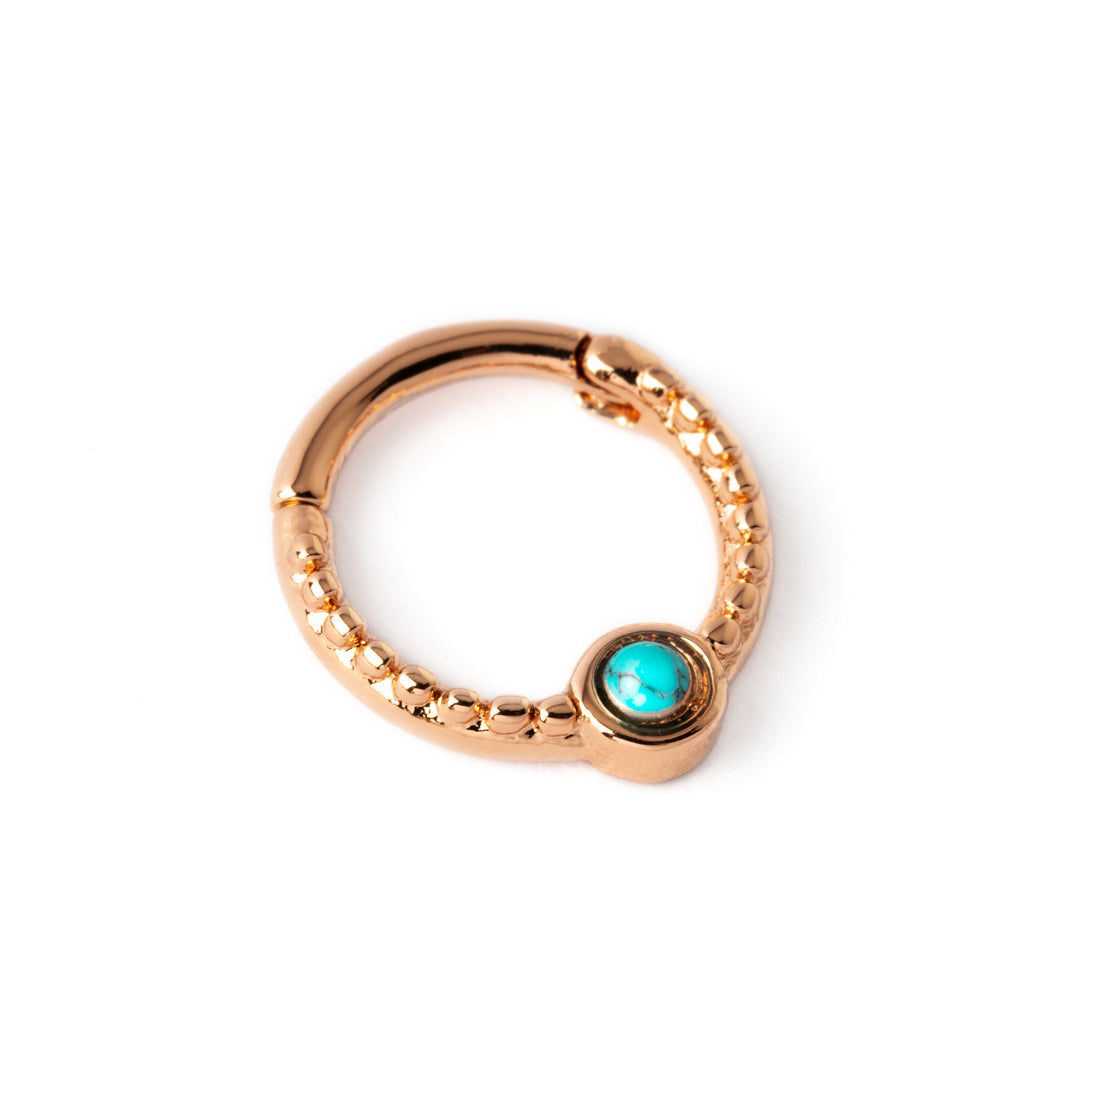 Dayaa rose gold surgical steel septum clicker with turquoise right side view